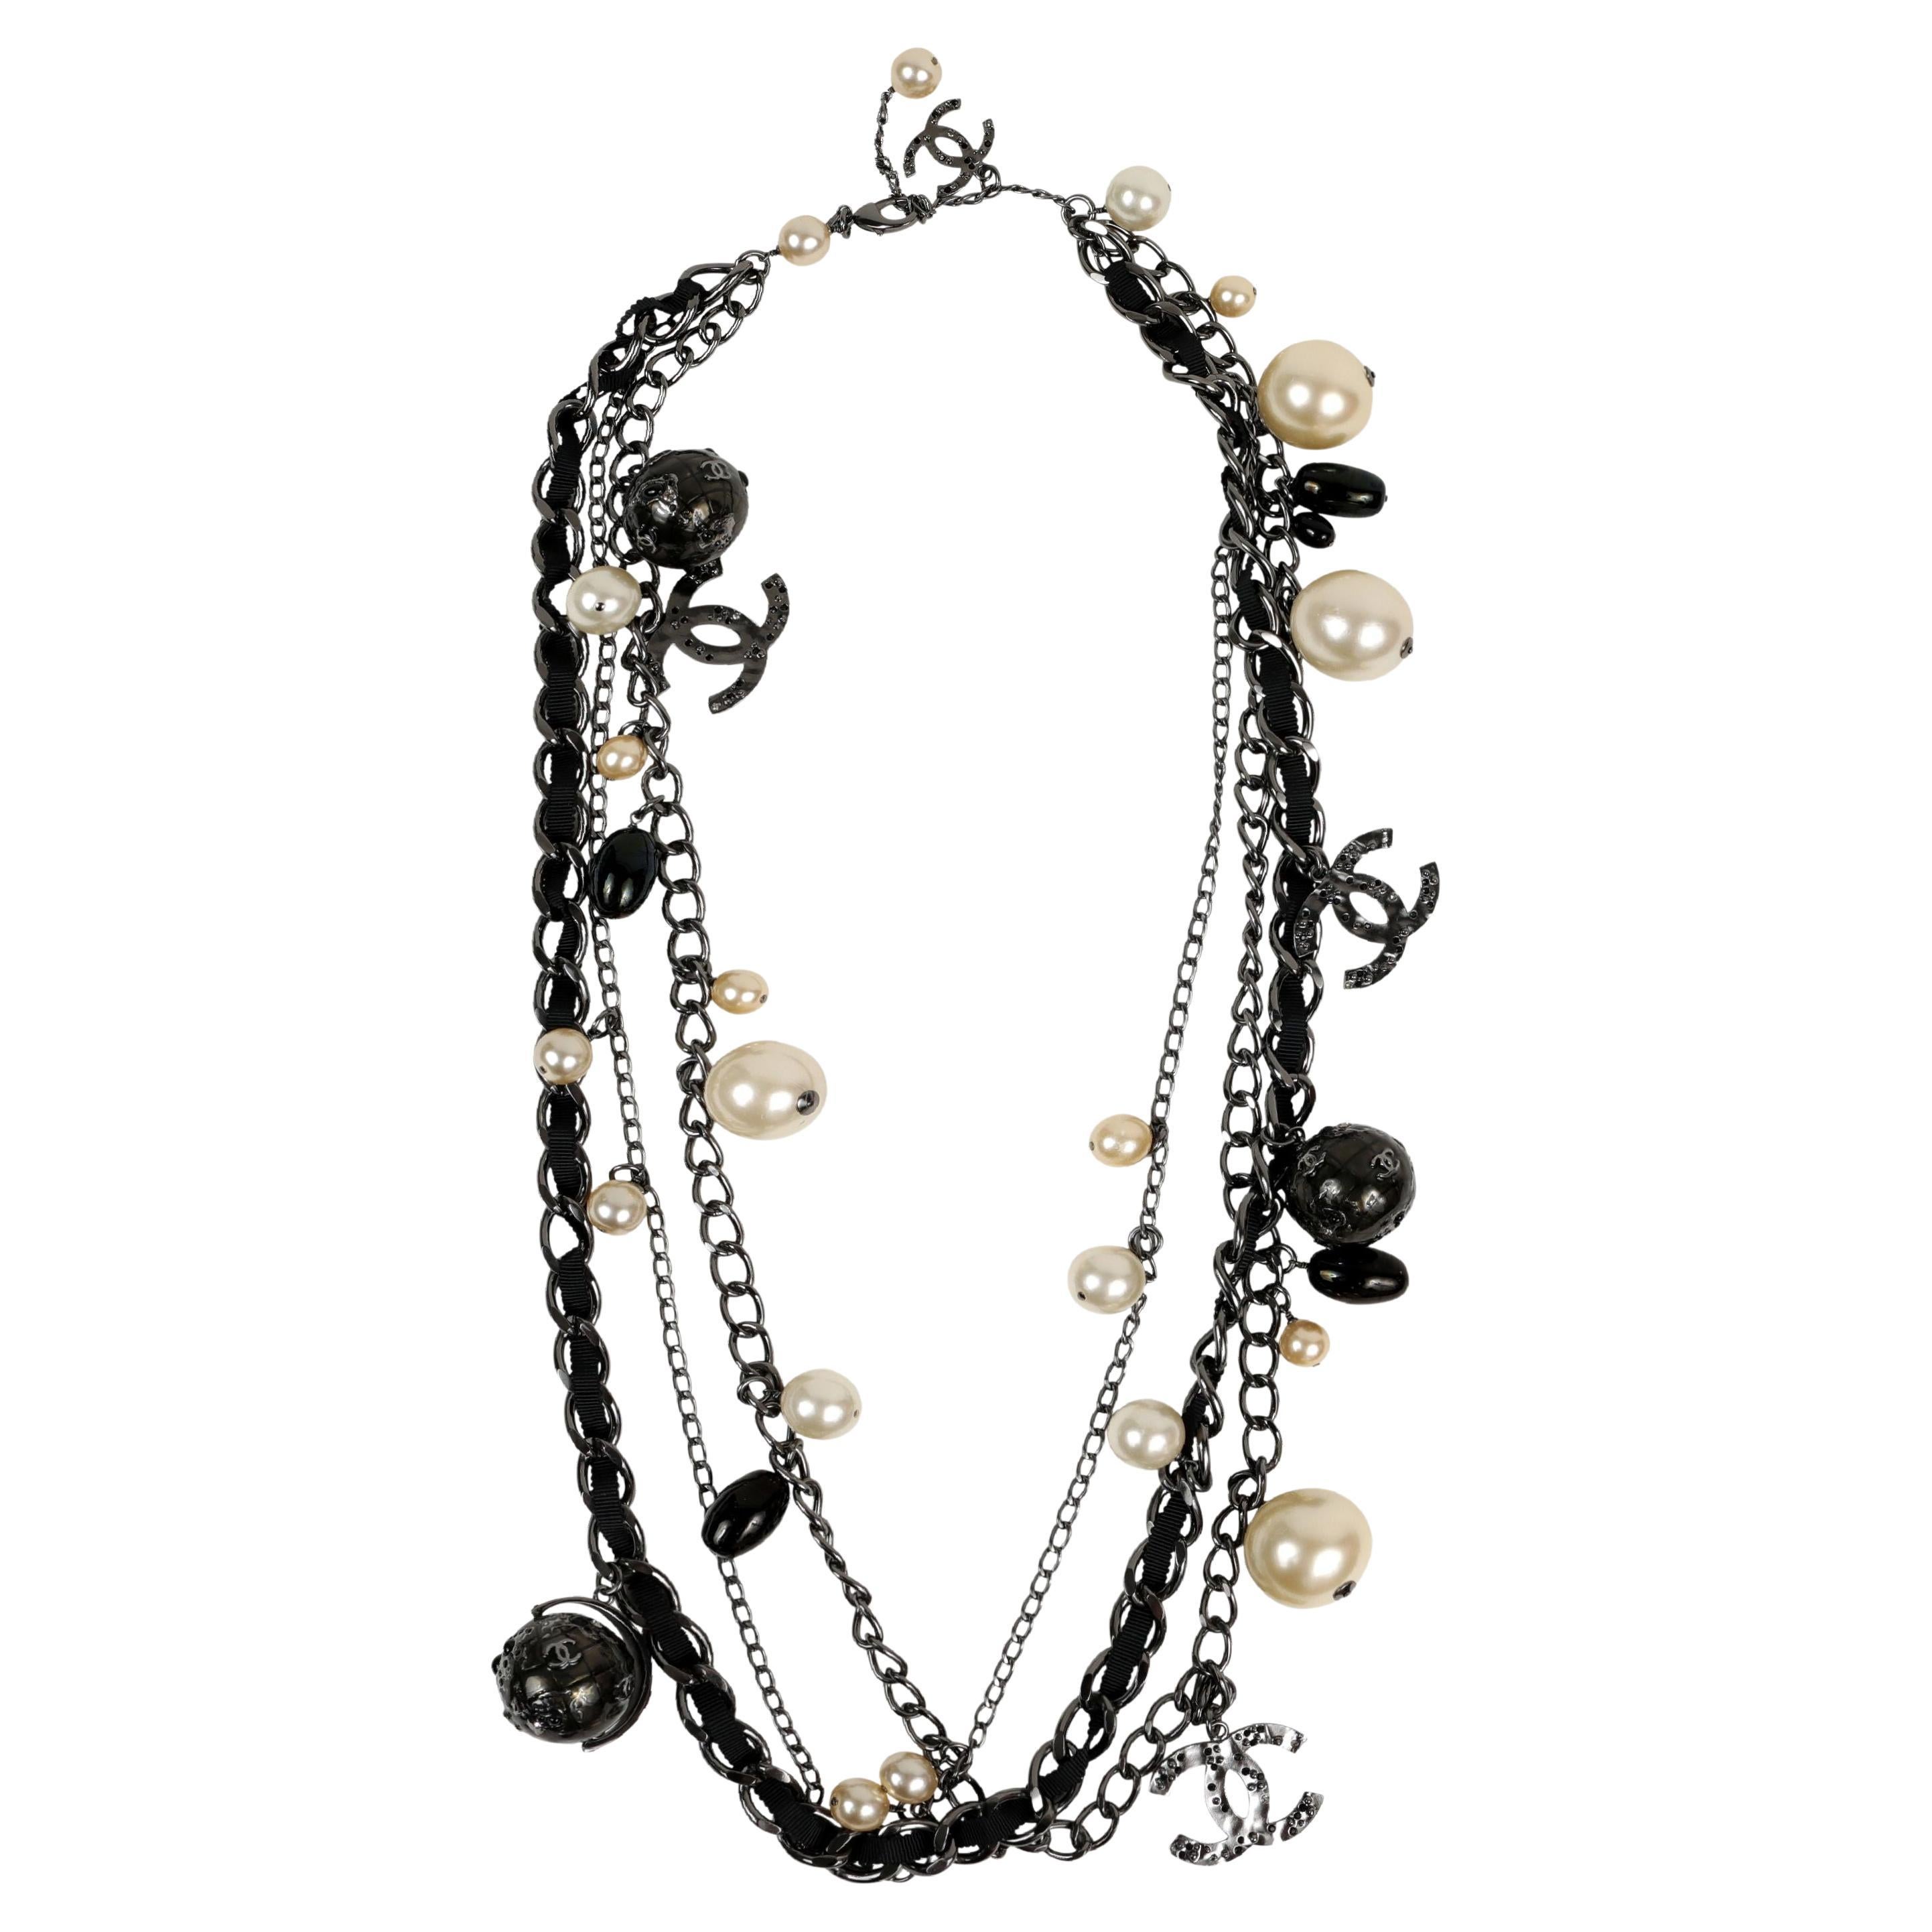 Chanel Ruthenium Globe Multi Chain Necklace with Pearls For Sale